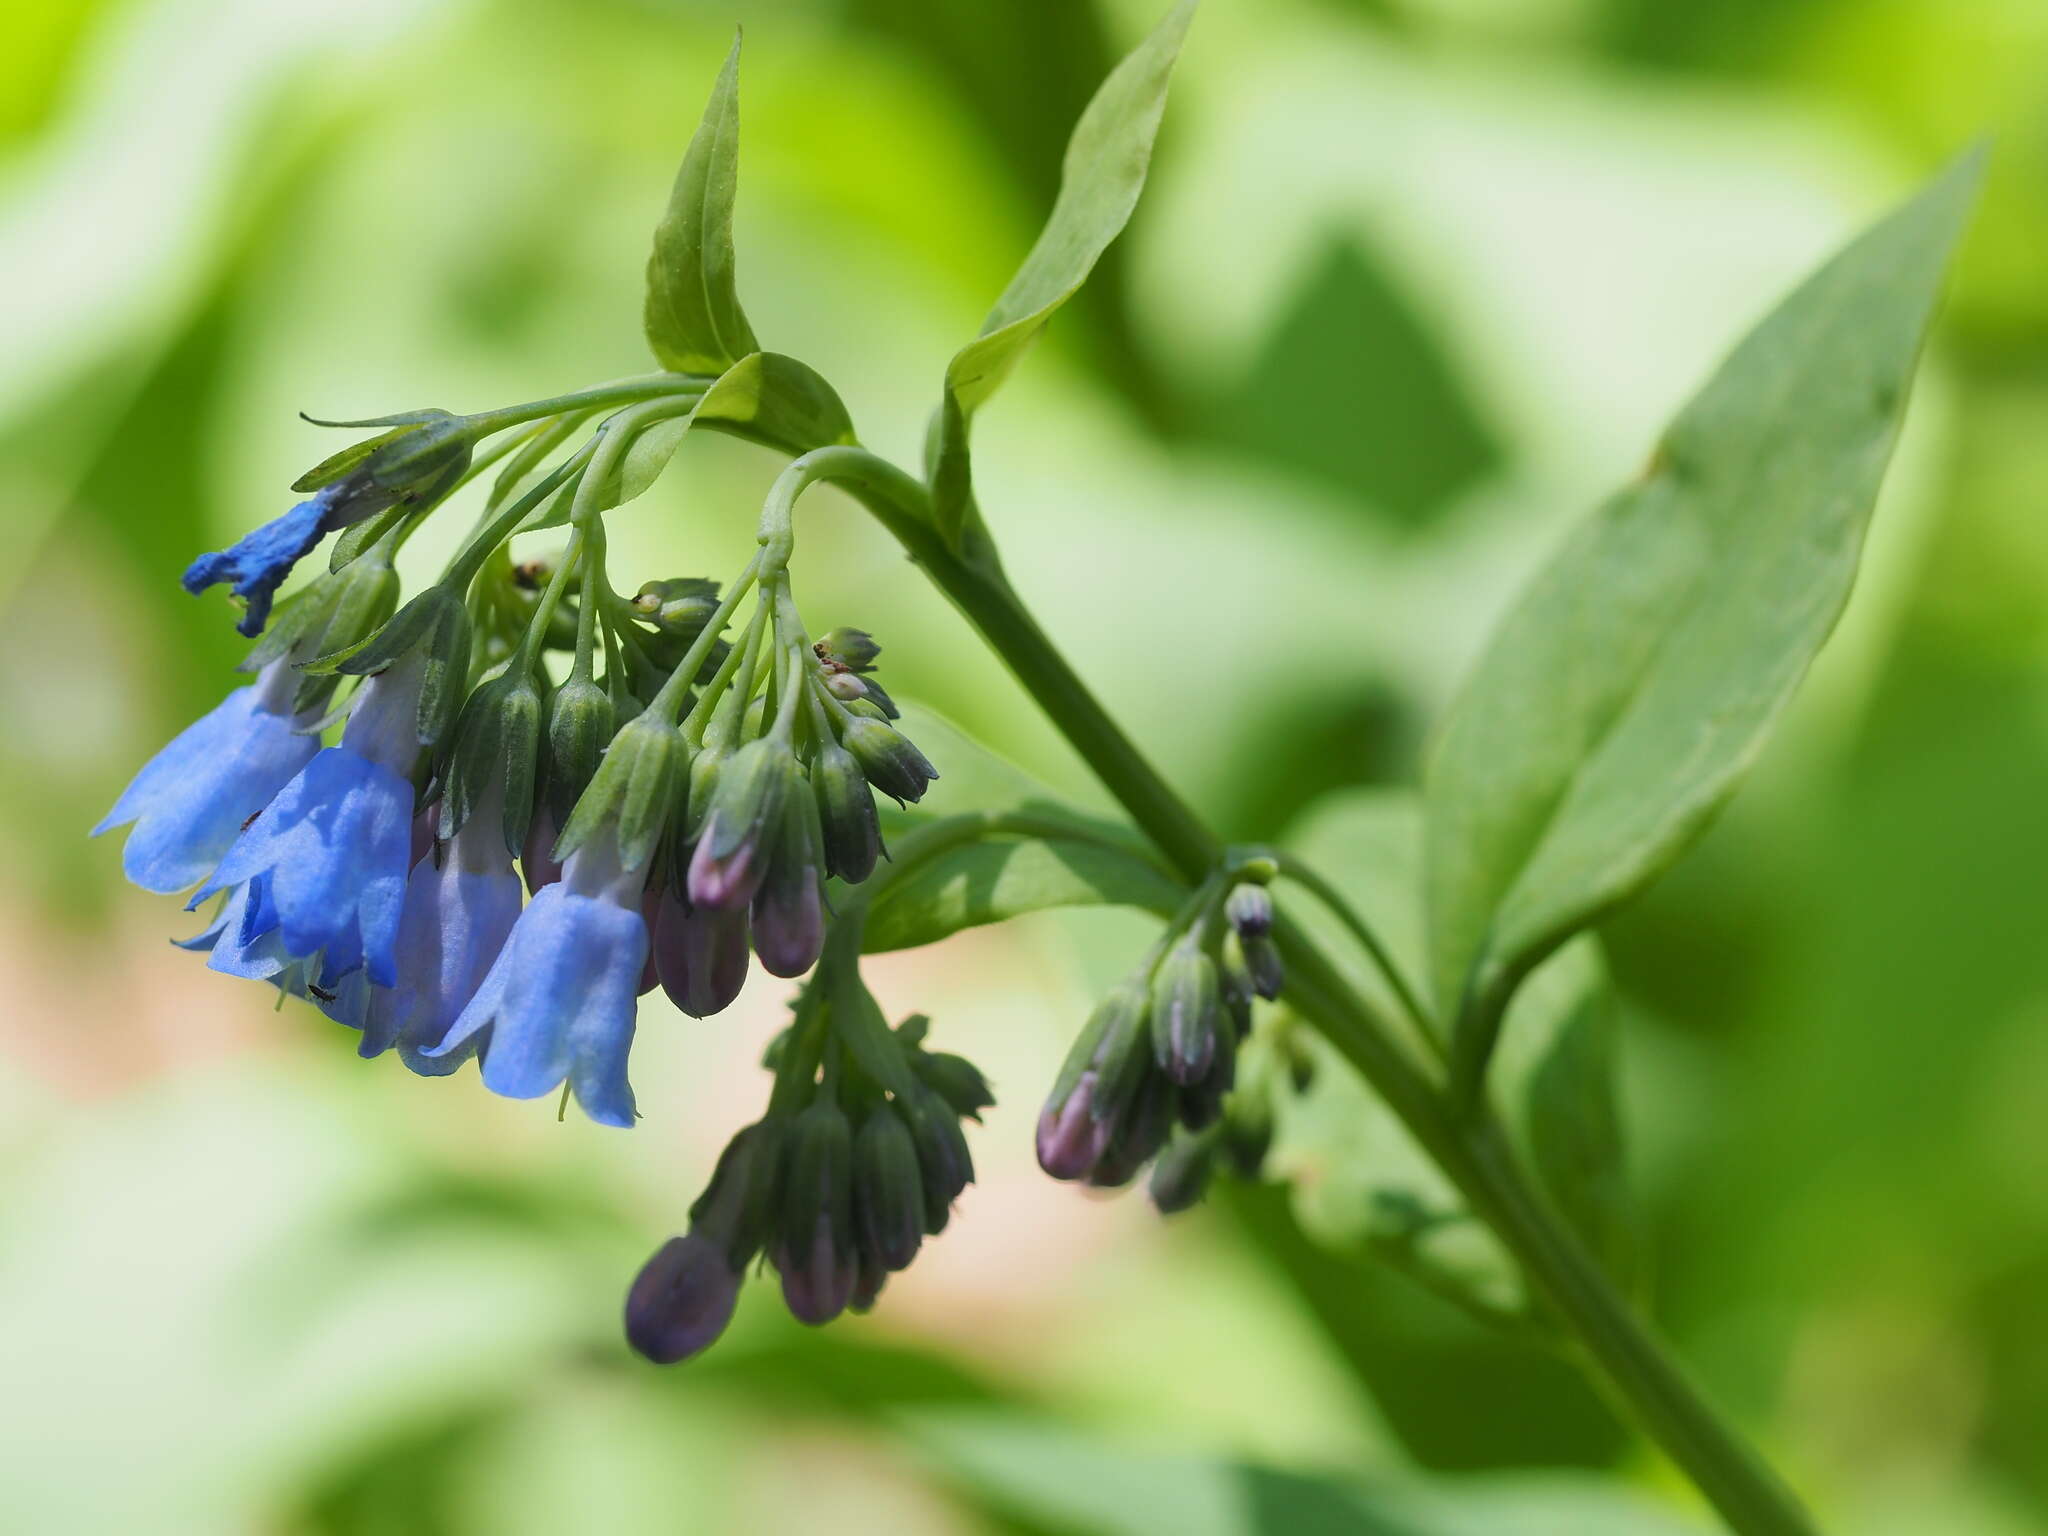 Image of tall fringed bluebells